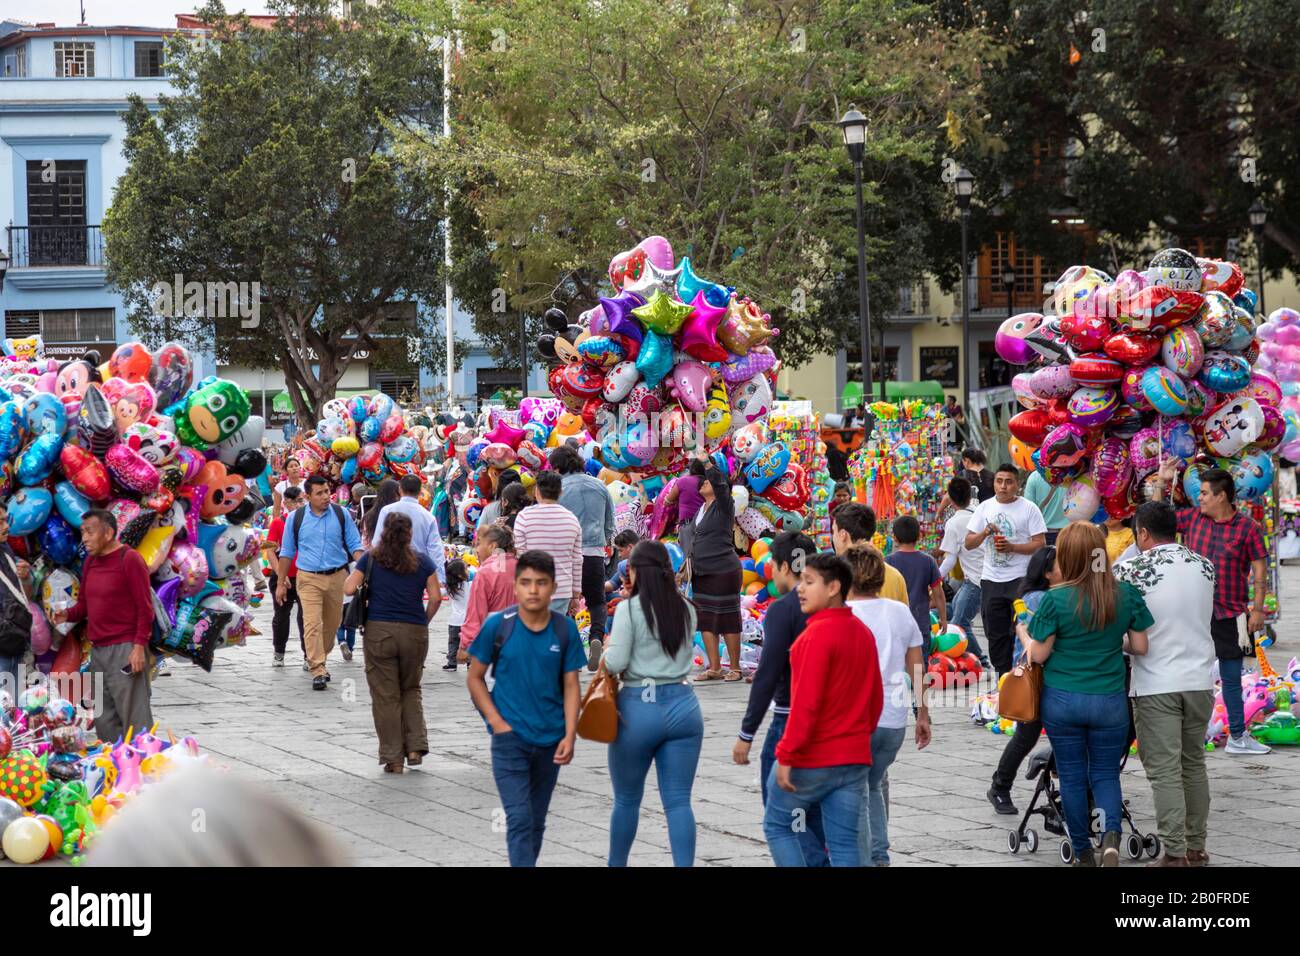 Oaxaca, Mexico - Vendors sell balloons, toys, and souvenirs outside the Oaxaca Cathedral in the center of the city. Stock Photo